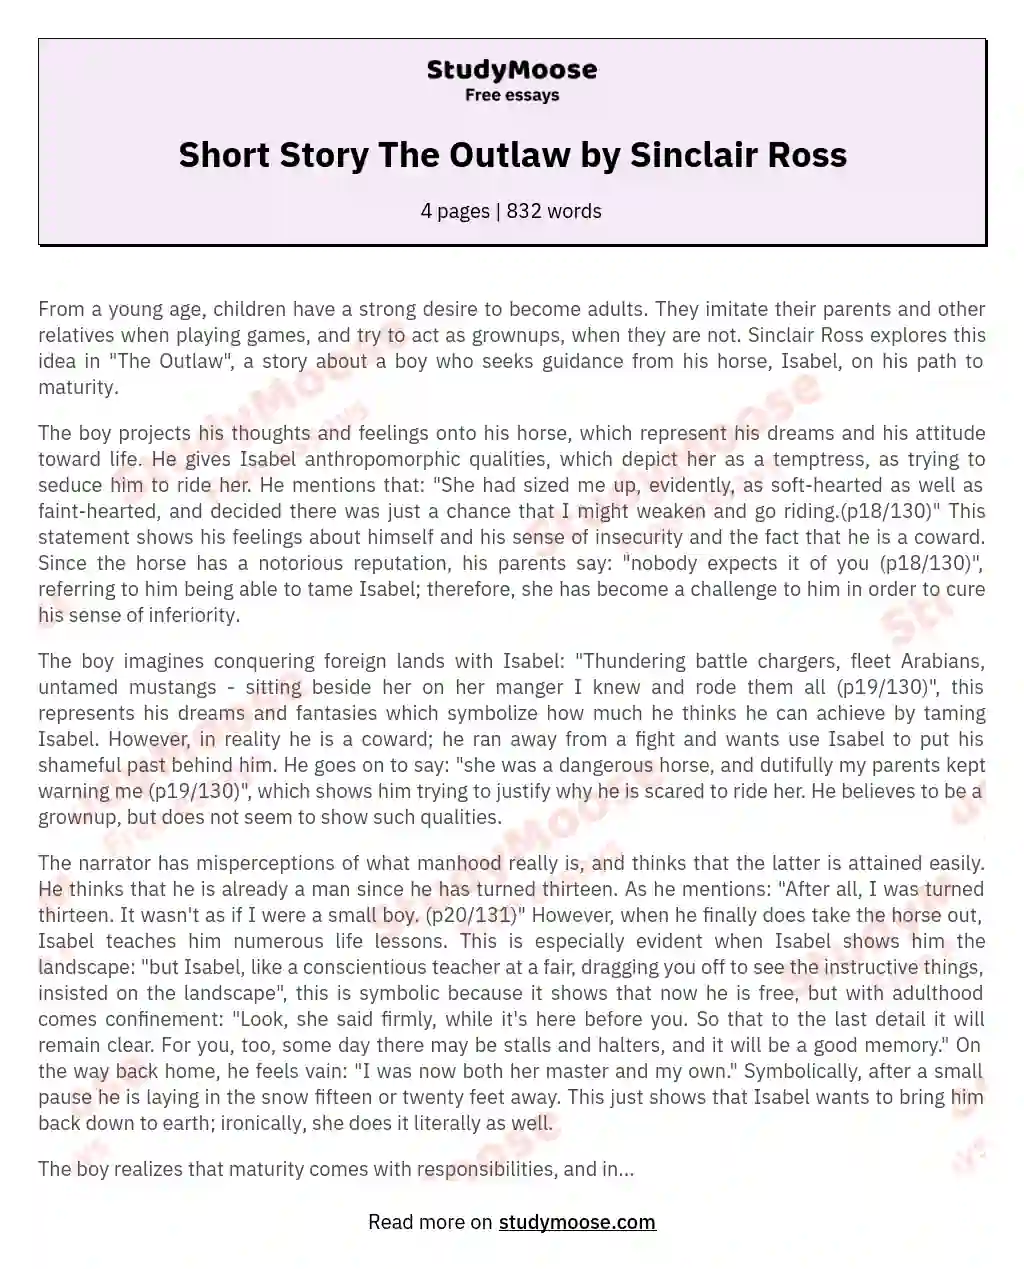 Short Story The Outlaw by Sinclair Ross essay